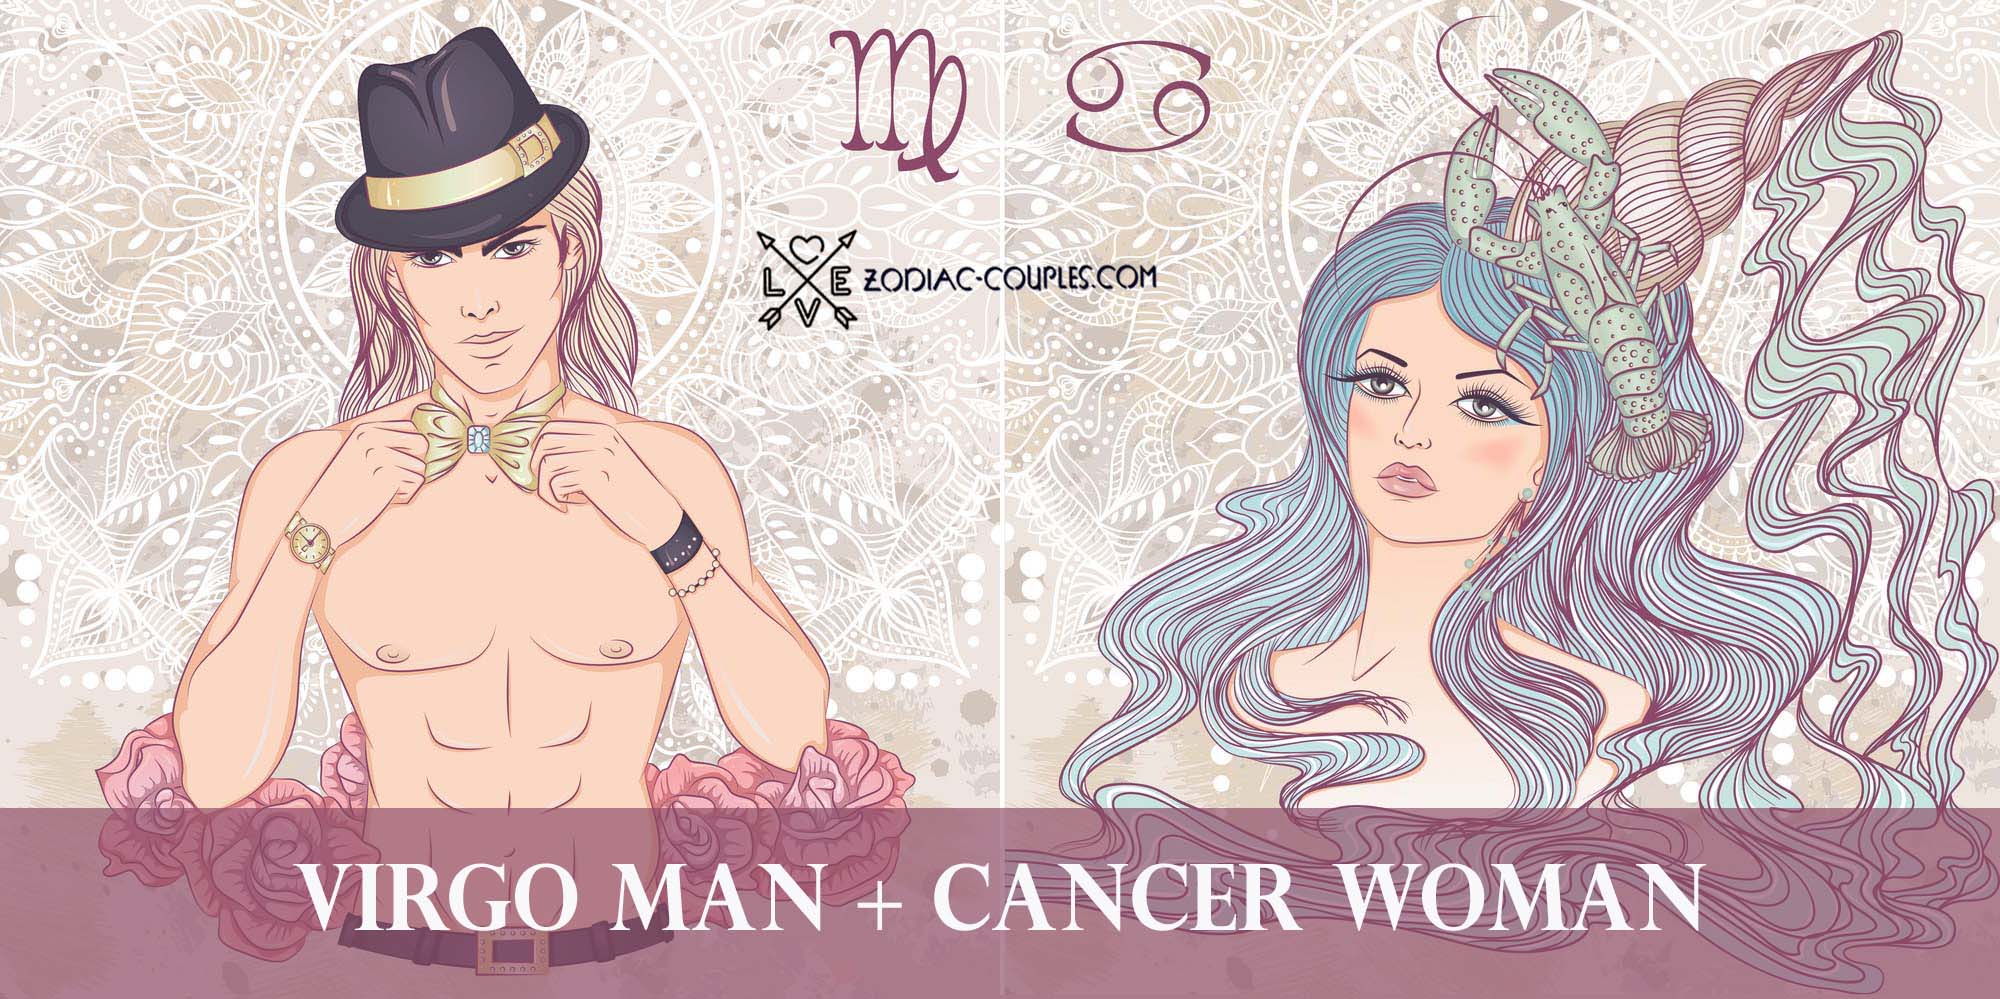 Real couples' experience of Cancer woman and Virgo man relationships: ...